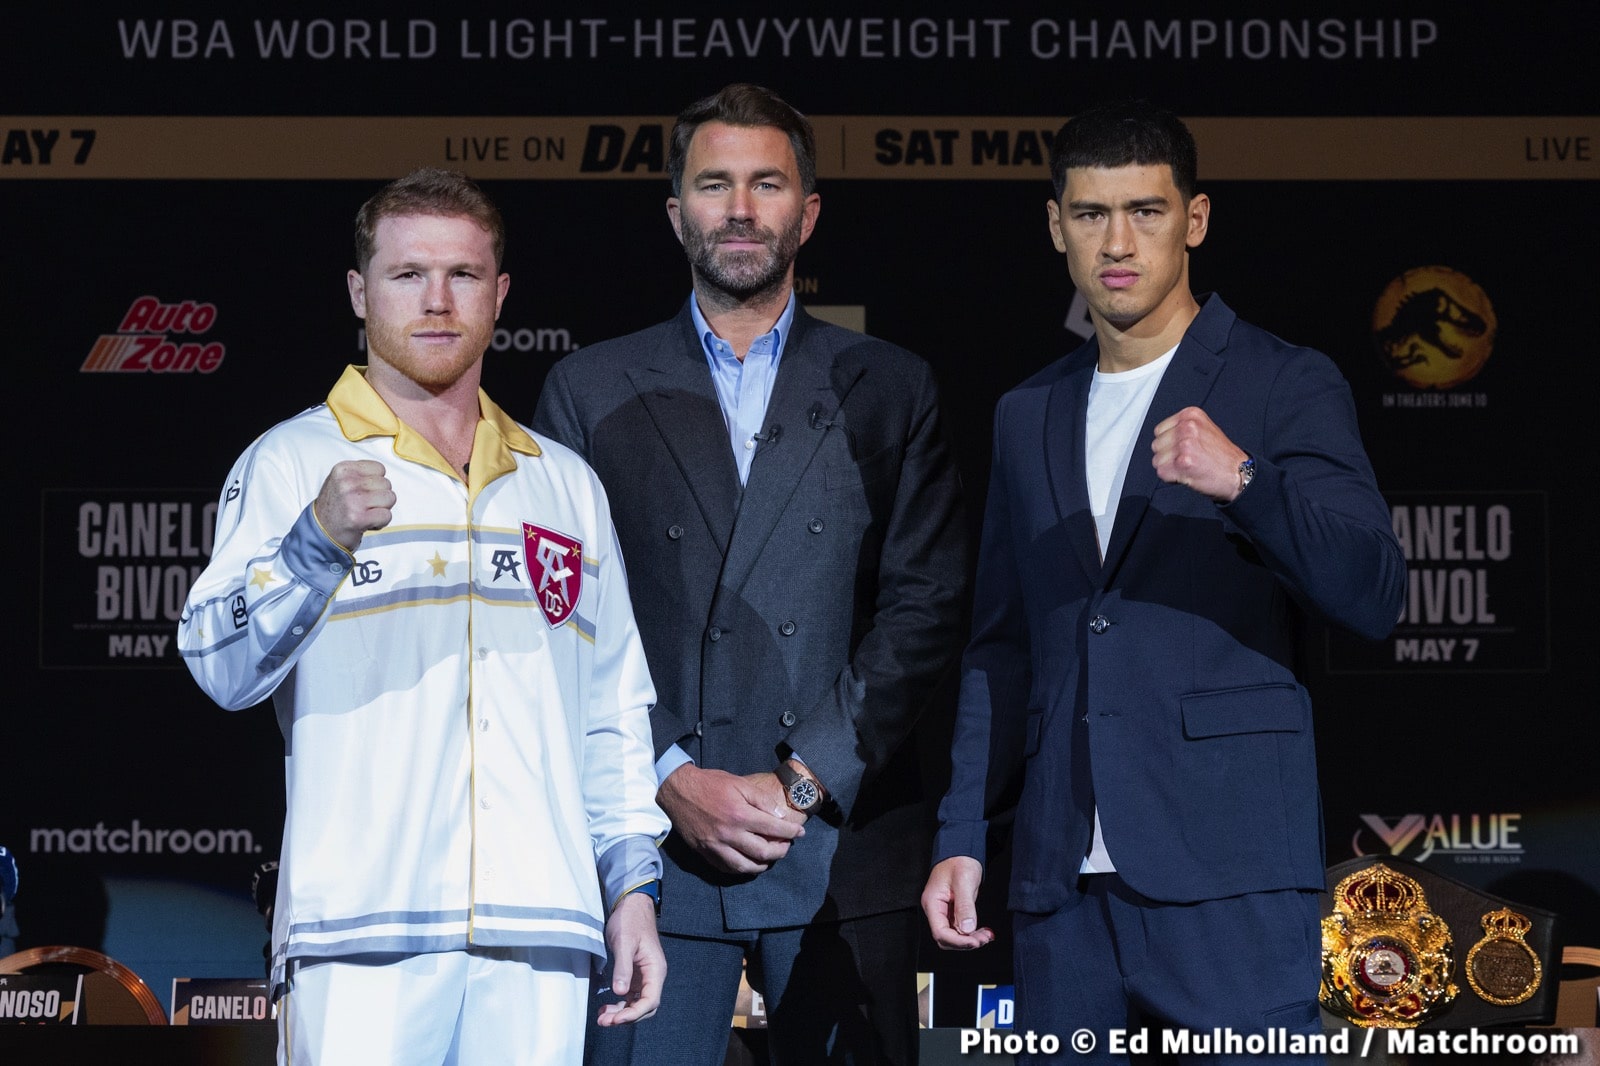 Image: Eddie Hearn wants Dmitry Bivol to challenge Canelo Alvarez at 168 for undisputed in September in "ideal world"